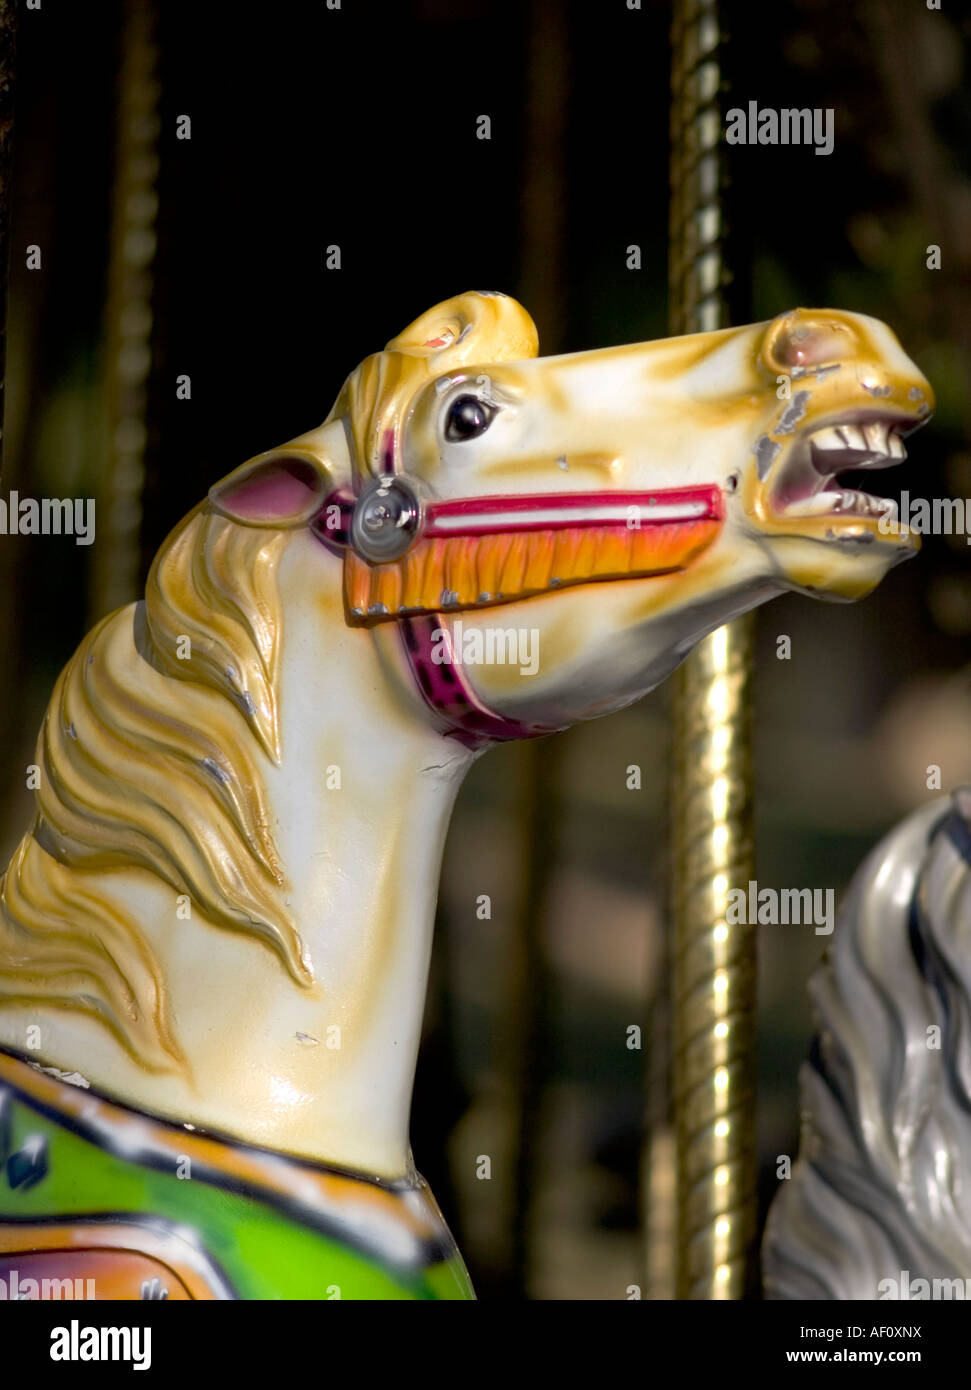 Brightly painted carousel horse. Stock Photo